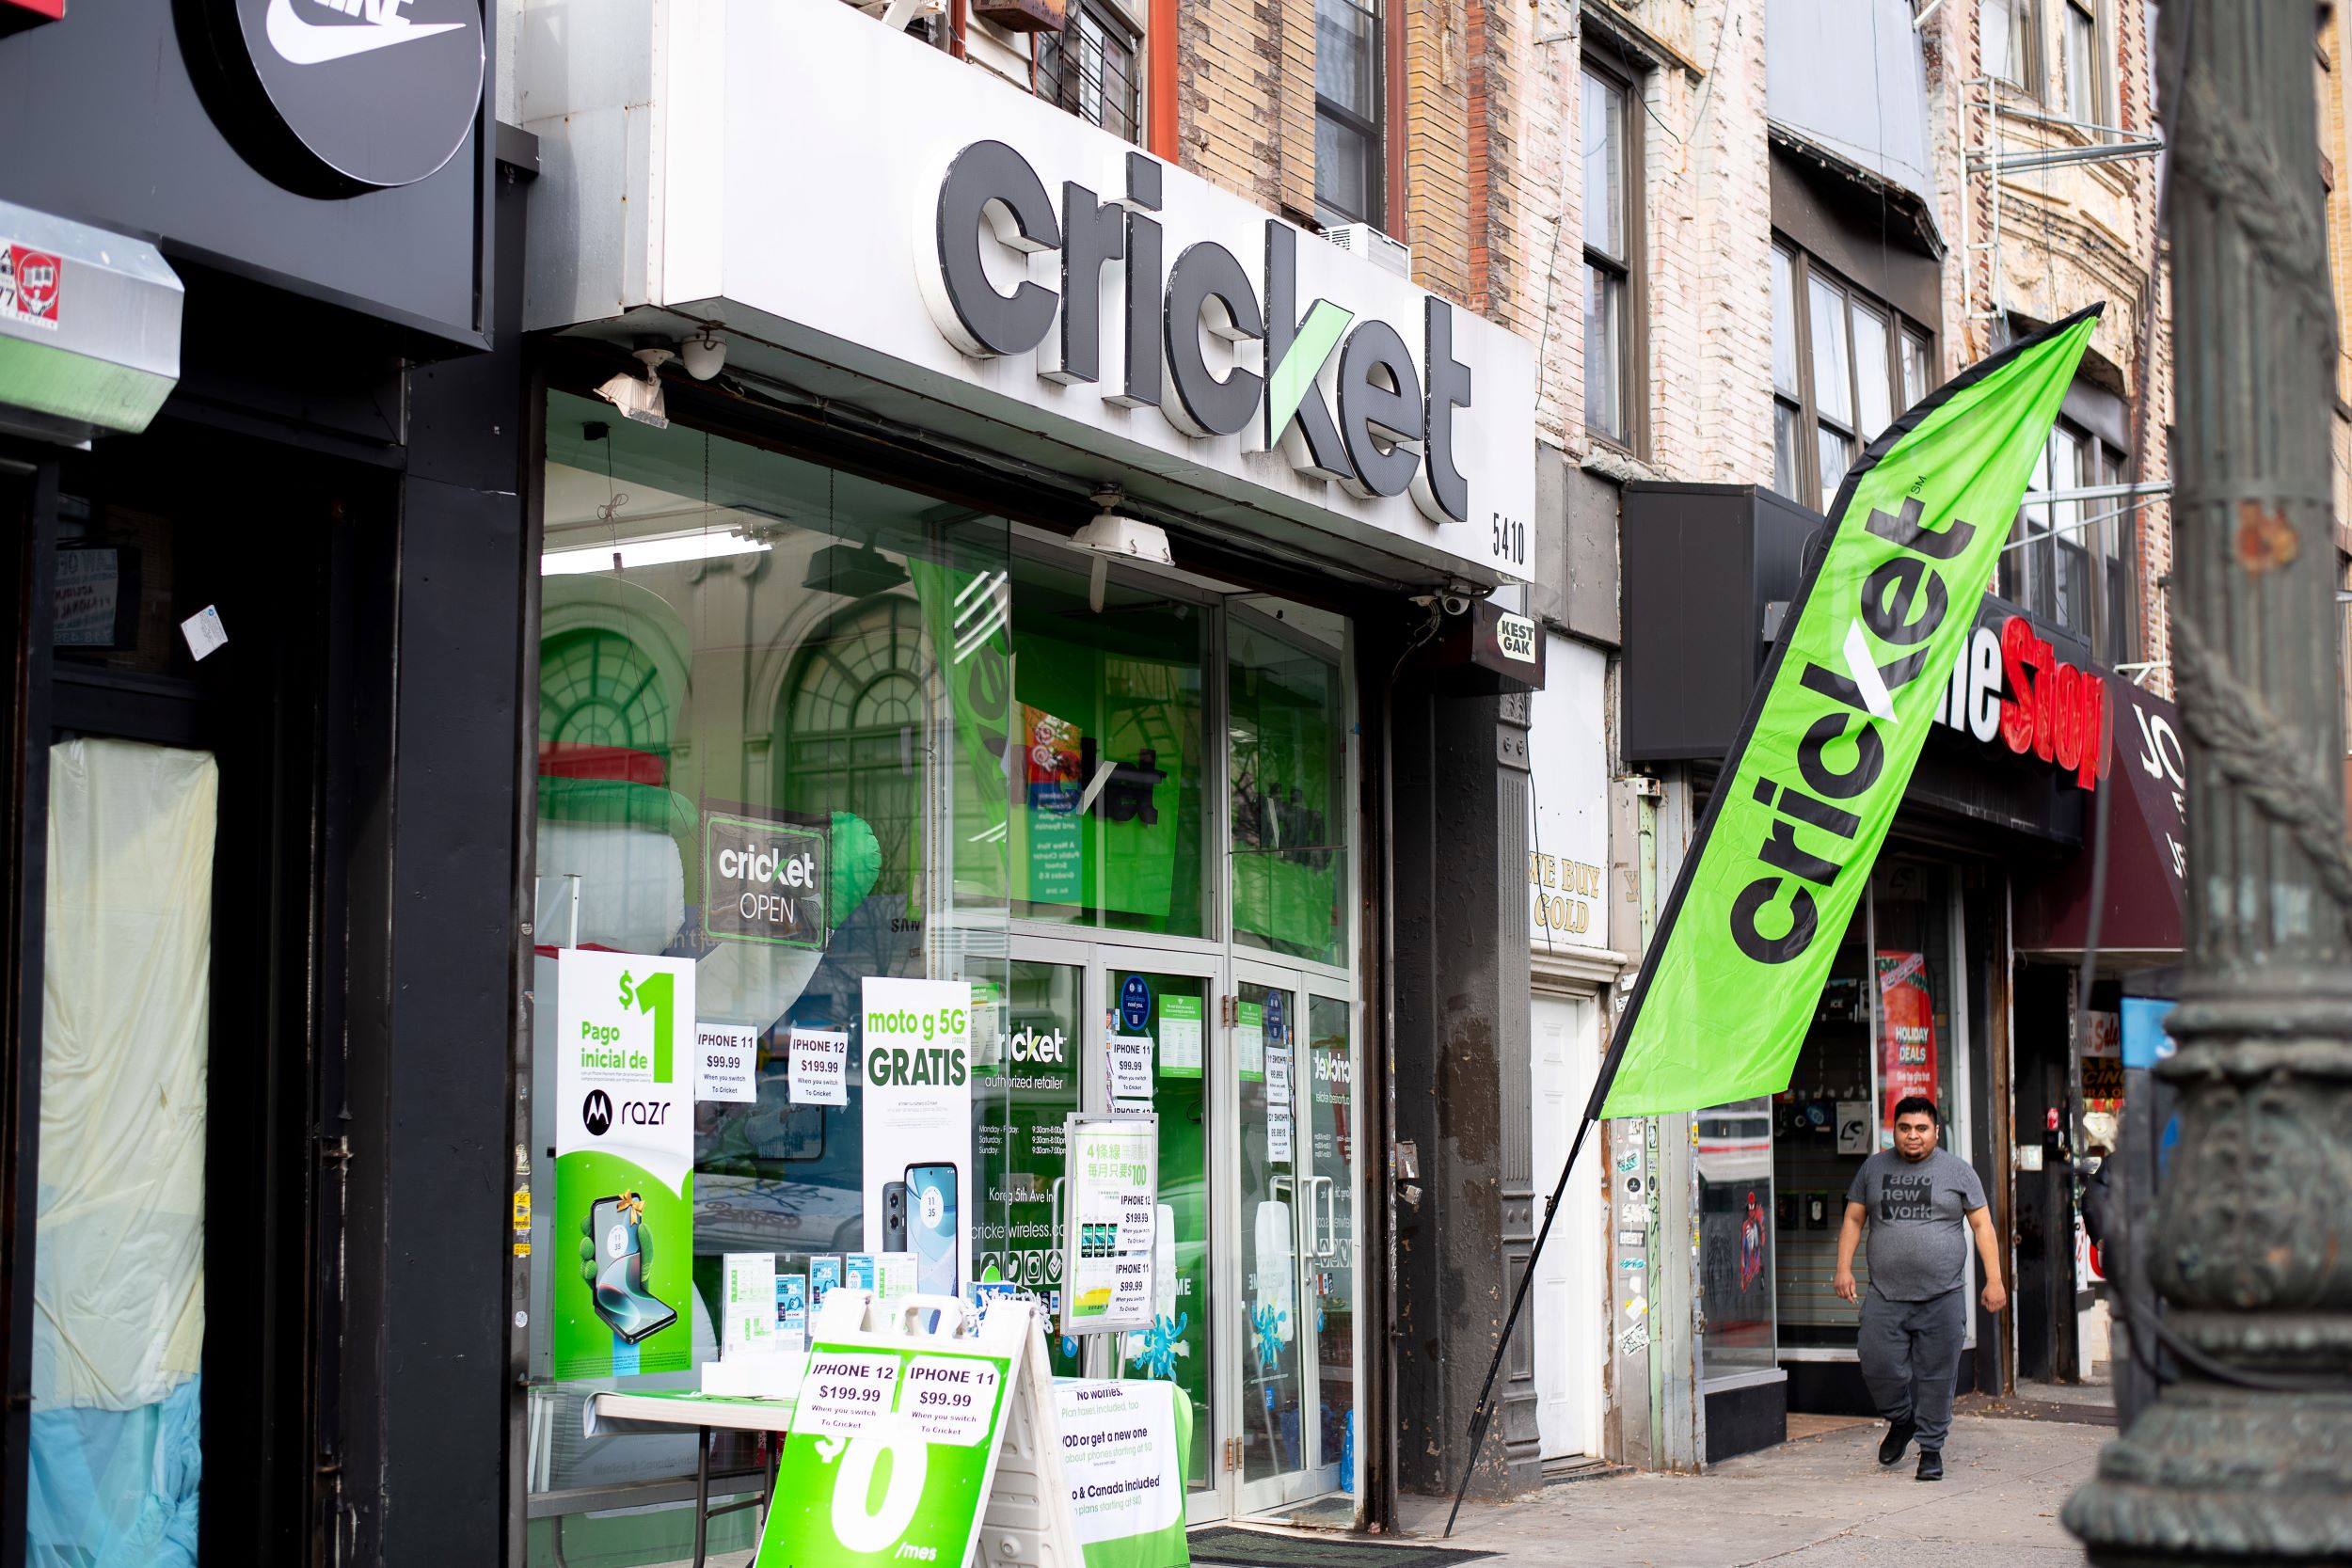 A cricket wireless store on a busy street with a prominent store sign, green promotional flags, and banners advertising deals. a person walks by the storefront.